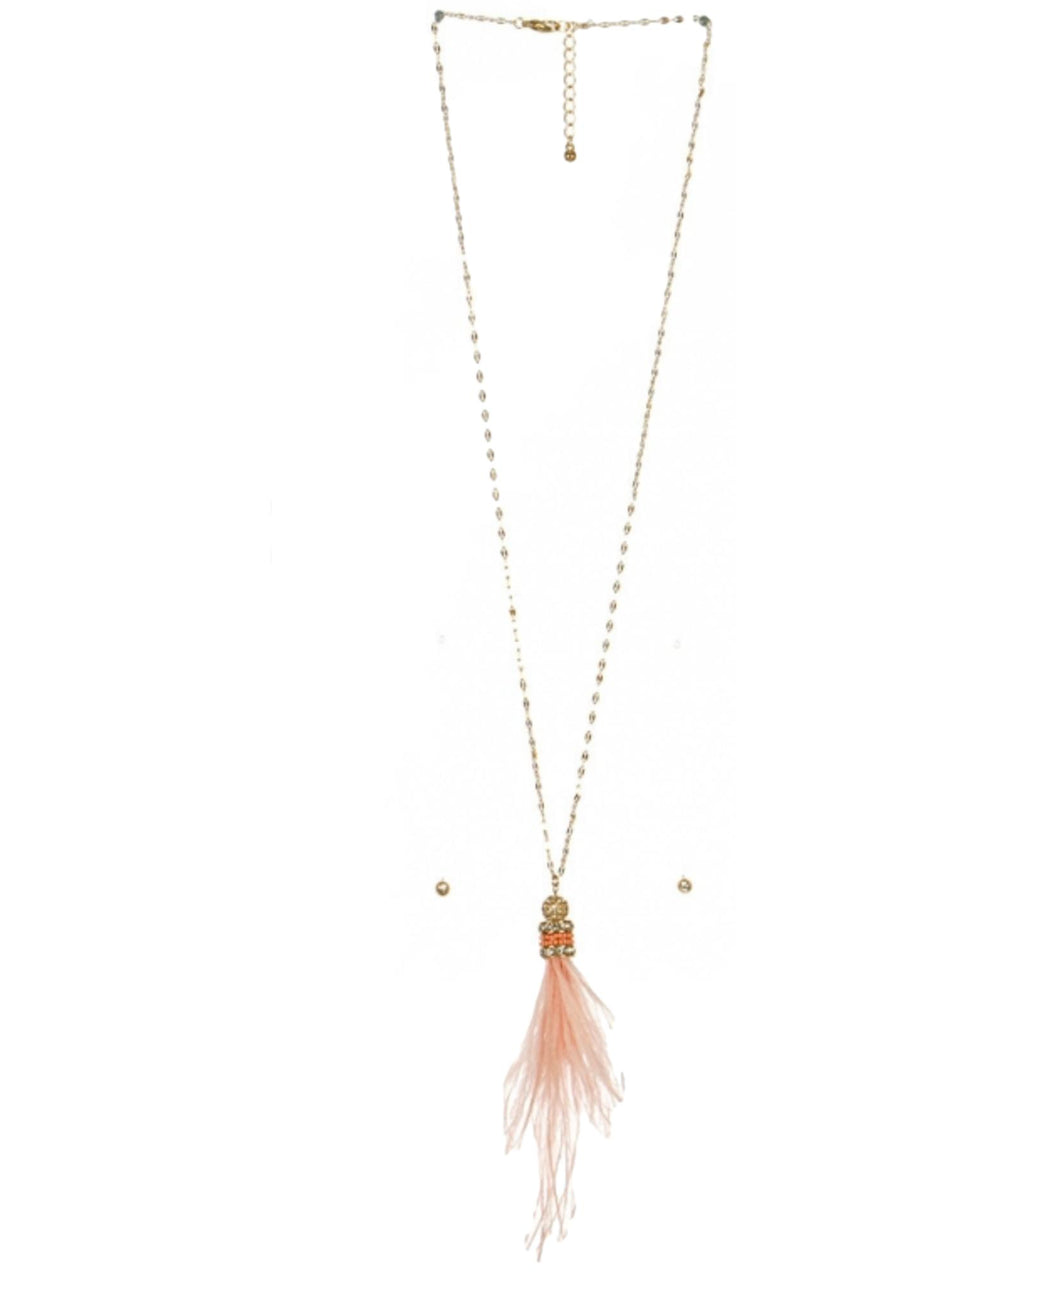 Feather Pendant Necklace Set with Gold Tone Chain